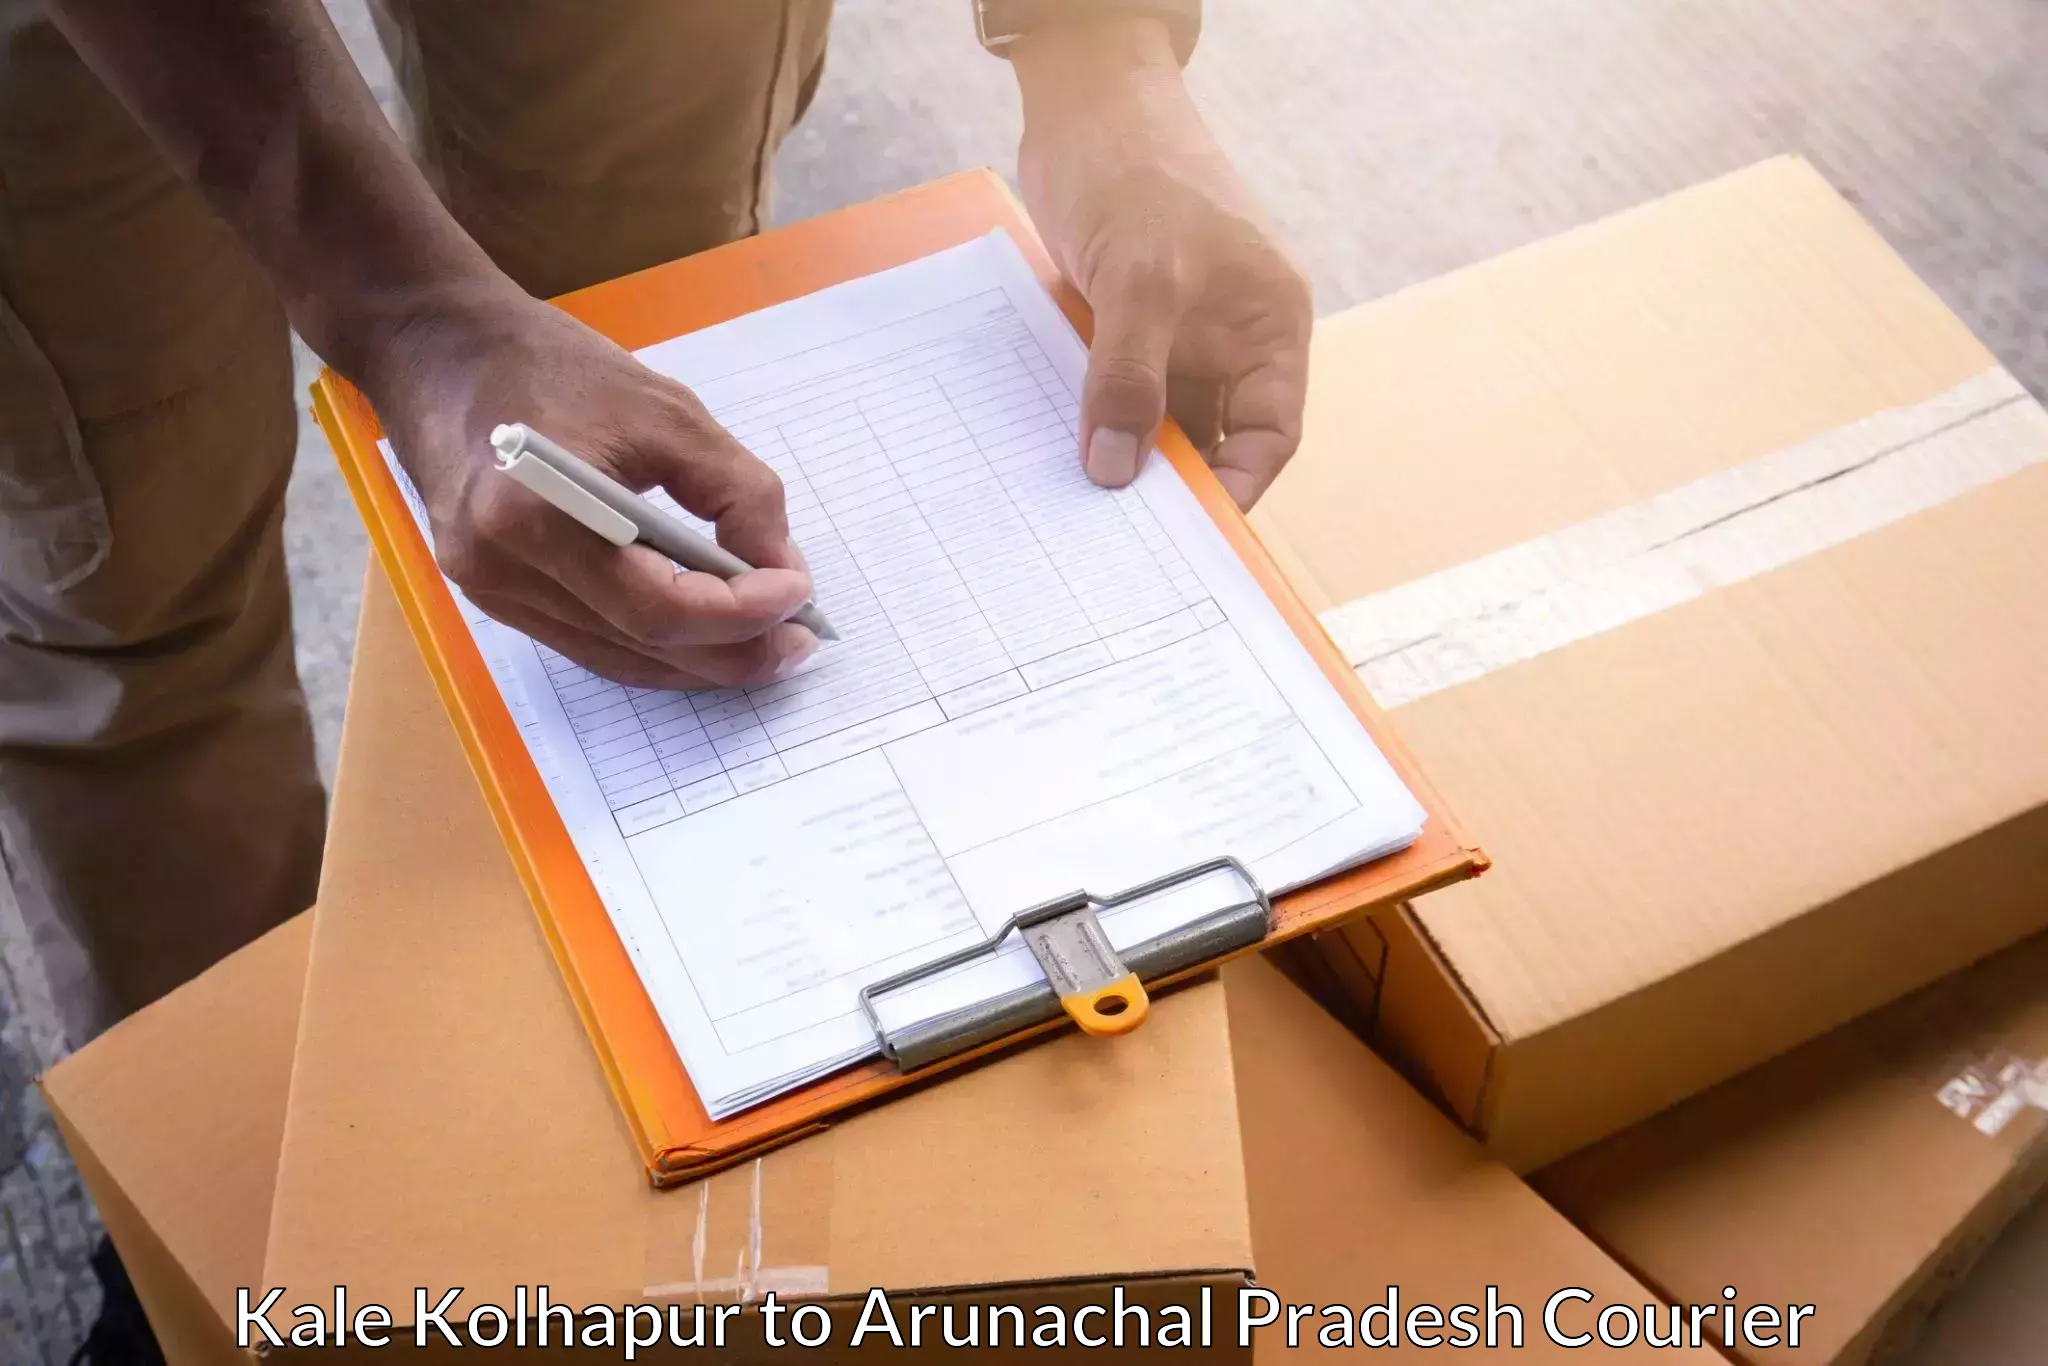 State-of-the-art courier technology Kale Kolhapur to Upper Subansiri